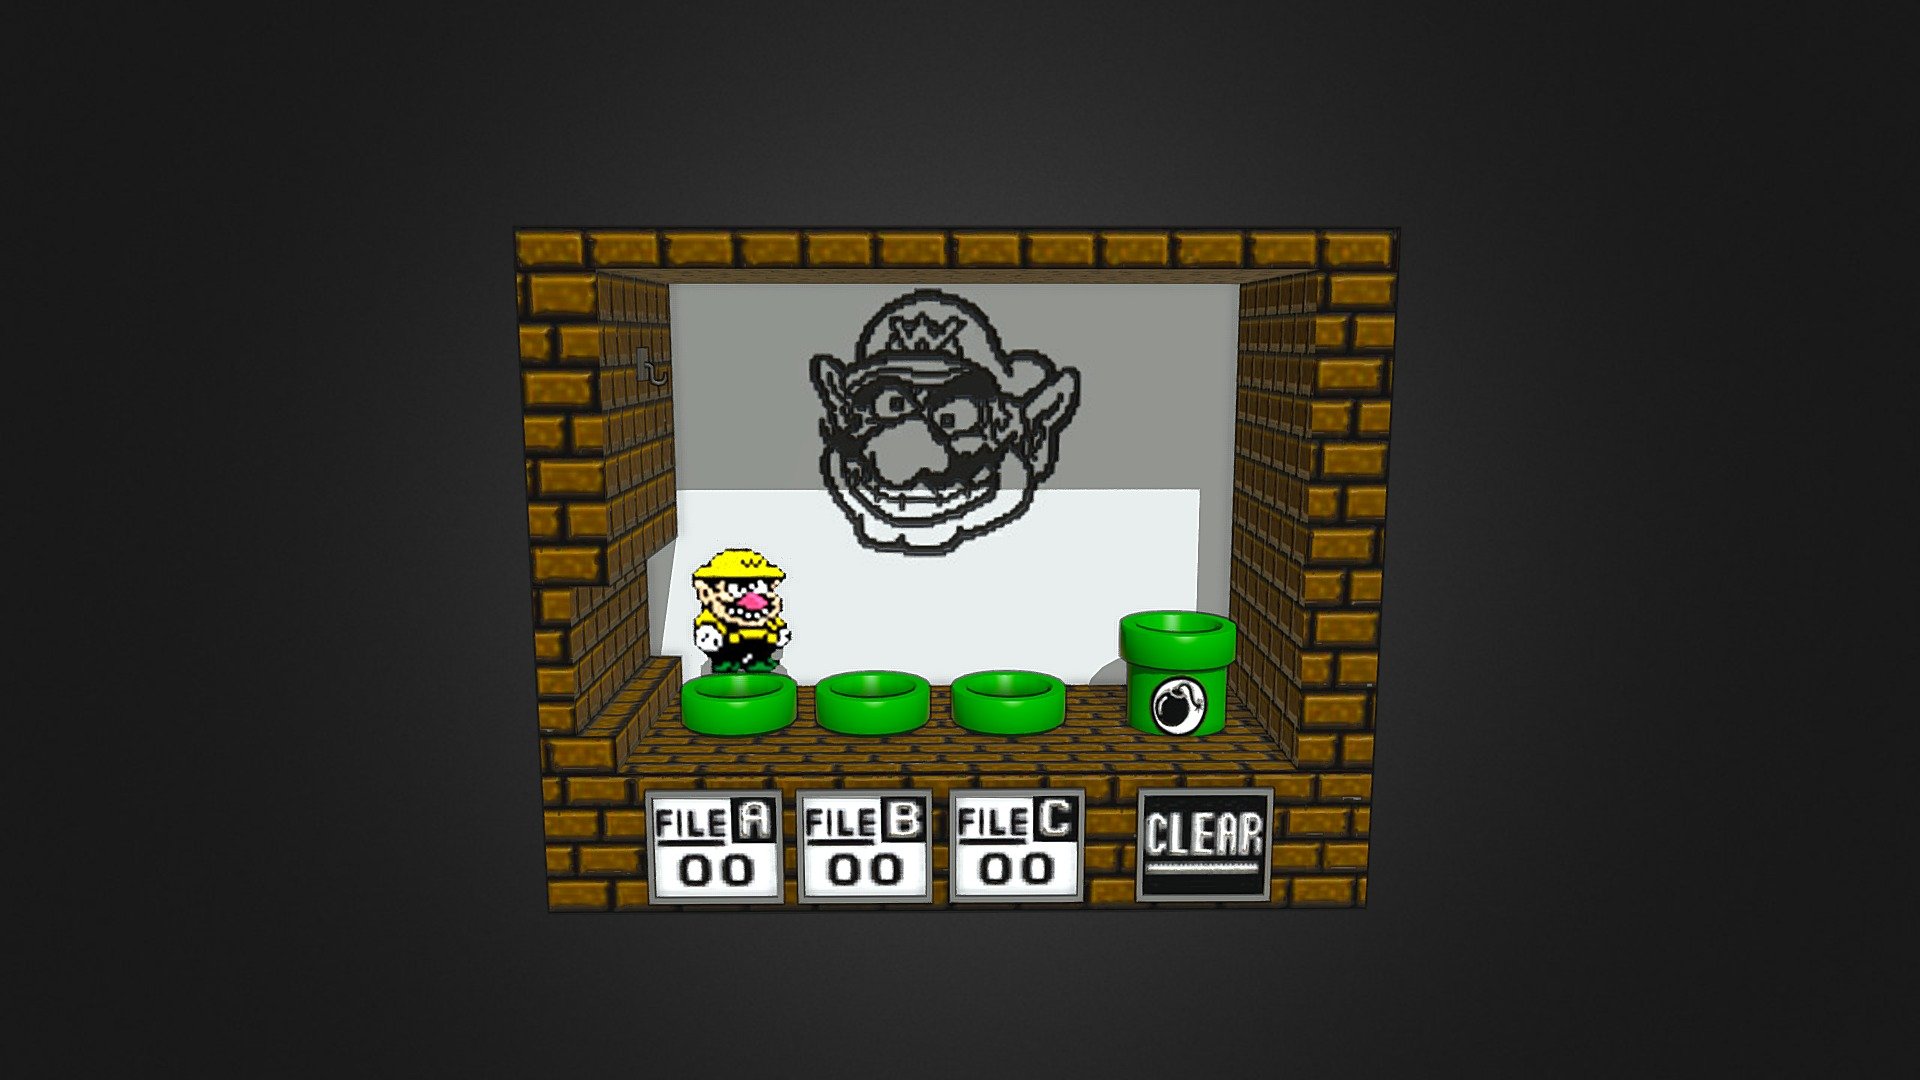 Small project of the game wario land of the classic game boy, modeled with 3dmax and all the maps of textures made with photoshop.
I hope you like it !!!

Proyecto pequeño del juego wario land de la game boy clasica , modelado con 3dmax y todos los mapas de texturas hechos con photoshop .
Espero que os guste !!! - Wario Land 3D - 3D model by ericpr23 3d model